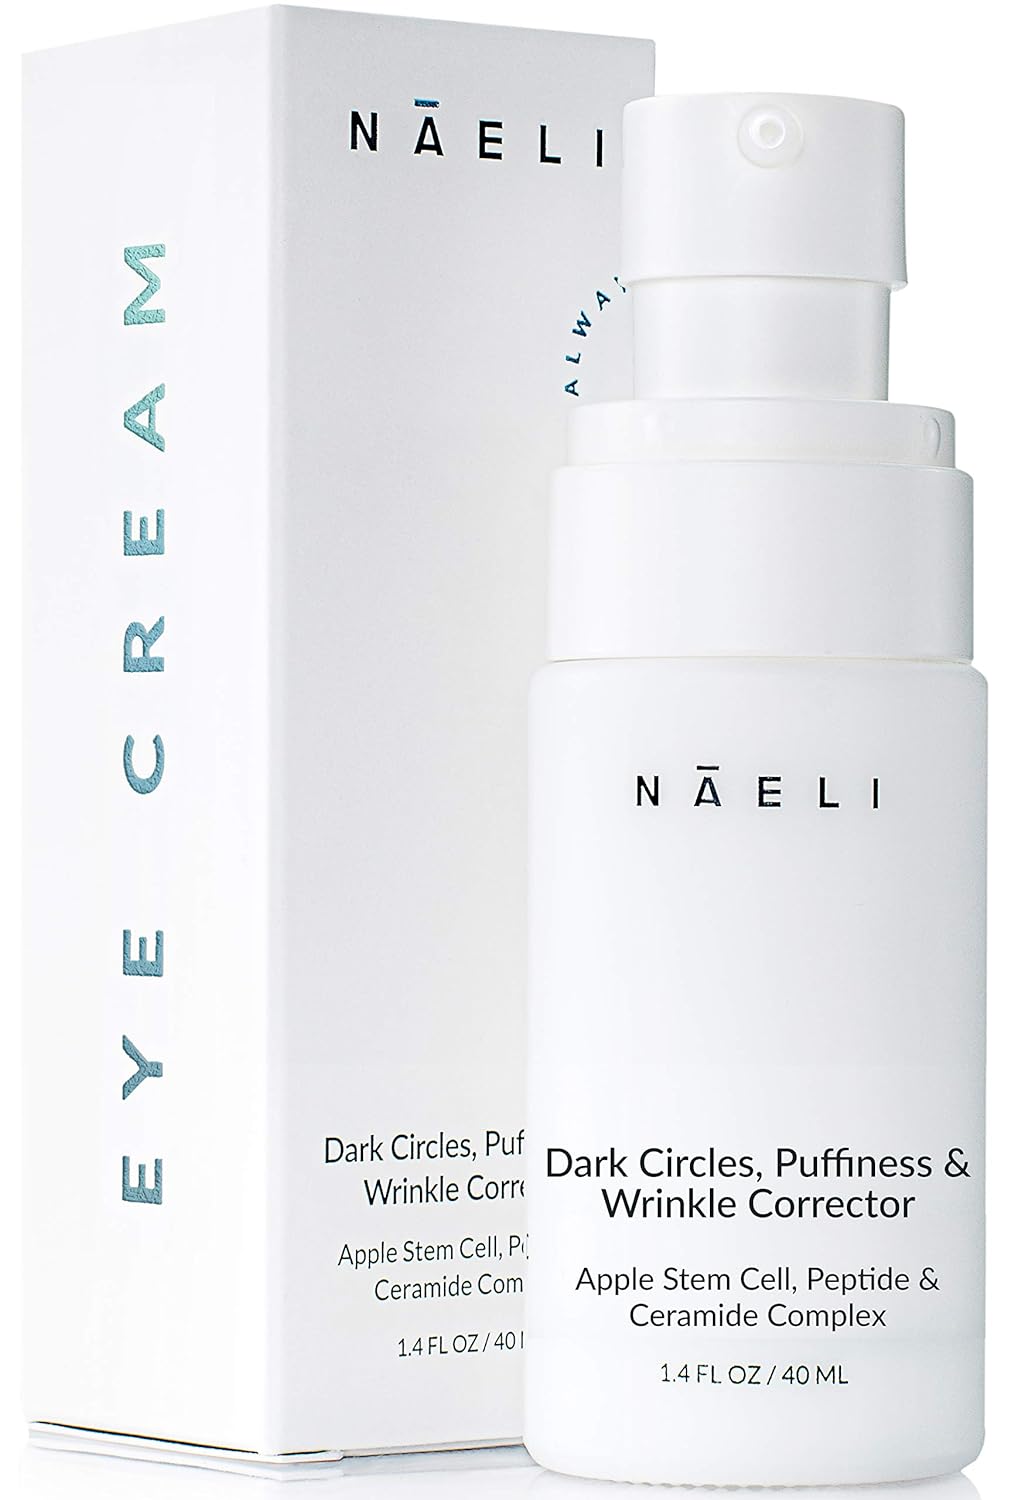 NAELI Eye Cream for Dark Circles, Puffiness & Wrinkles with Anti Aging Apple Stem Cell & Peptide Complex - Reduces Fine Lines, Diminishes Bags & Restores Under Eye, 1.4